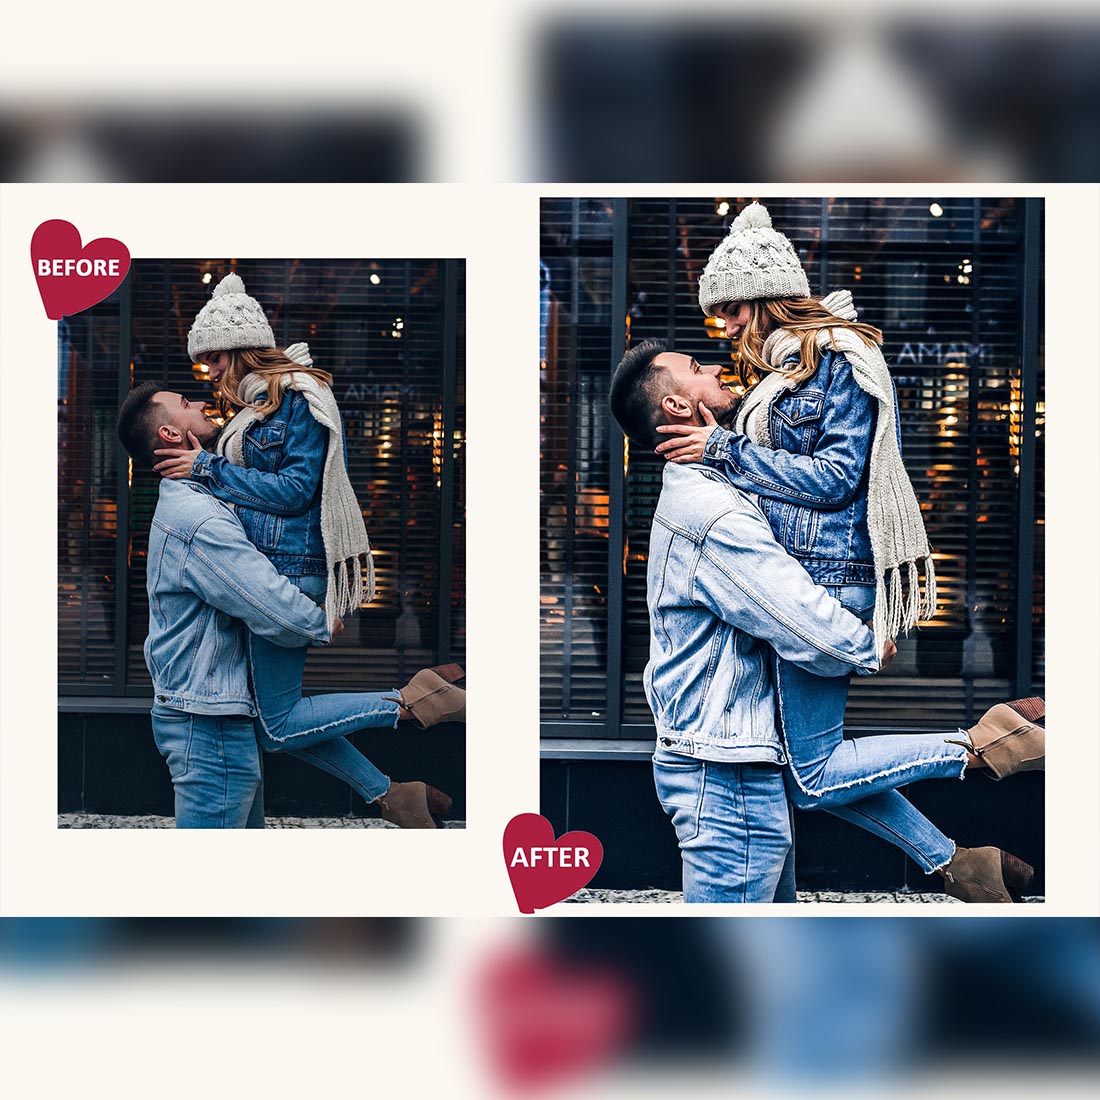 18 Photoshop Actions, The Kissing Ps Action, Romantic ACR Preset, Love Ps Filter, Atn Portrait And Lifestyle Theme For Instagram, Blogger preview image.